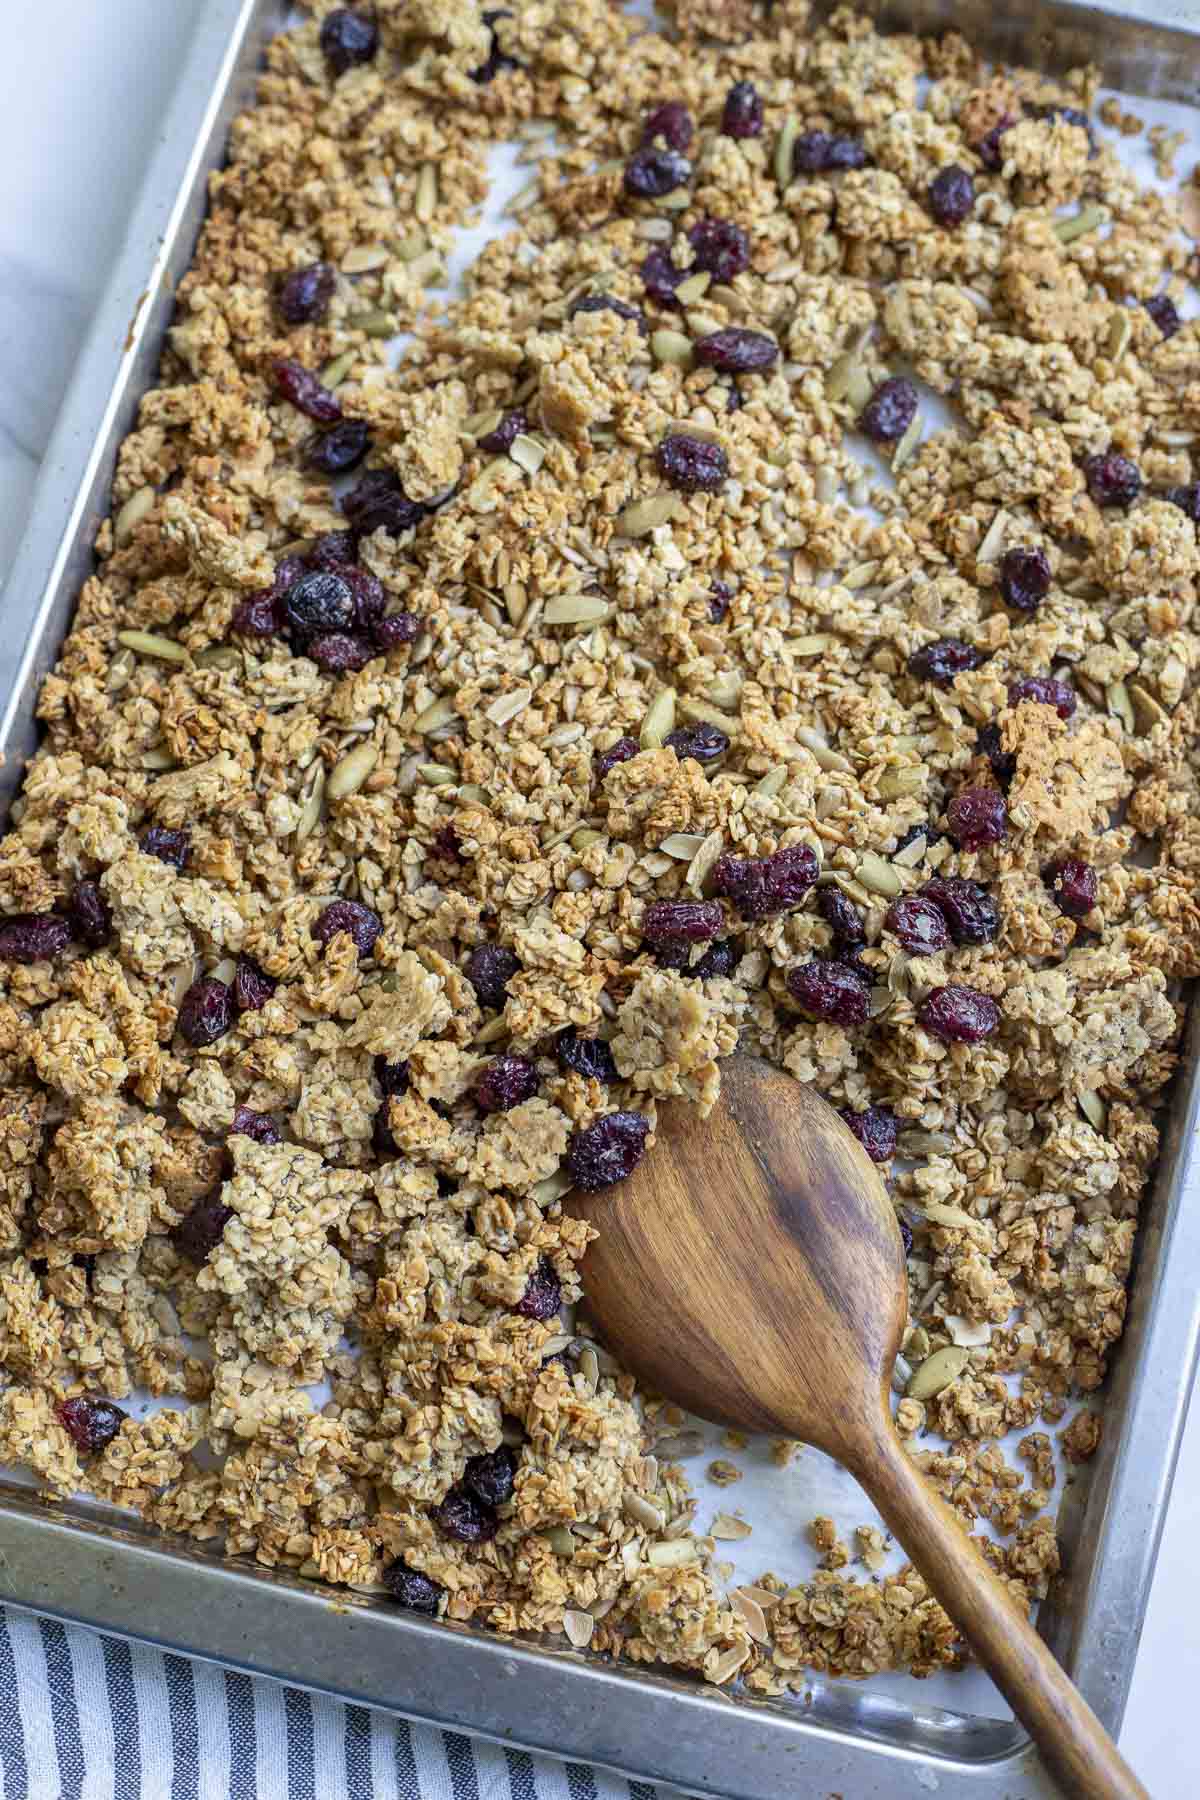 Sourdough granola with sunflower seeds, pumpkin seeds, and dried cranberries on a parchment lined baking sheet with a wooden spoon.